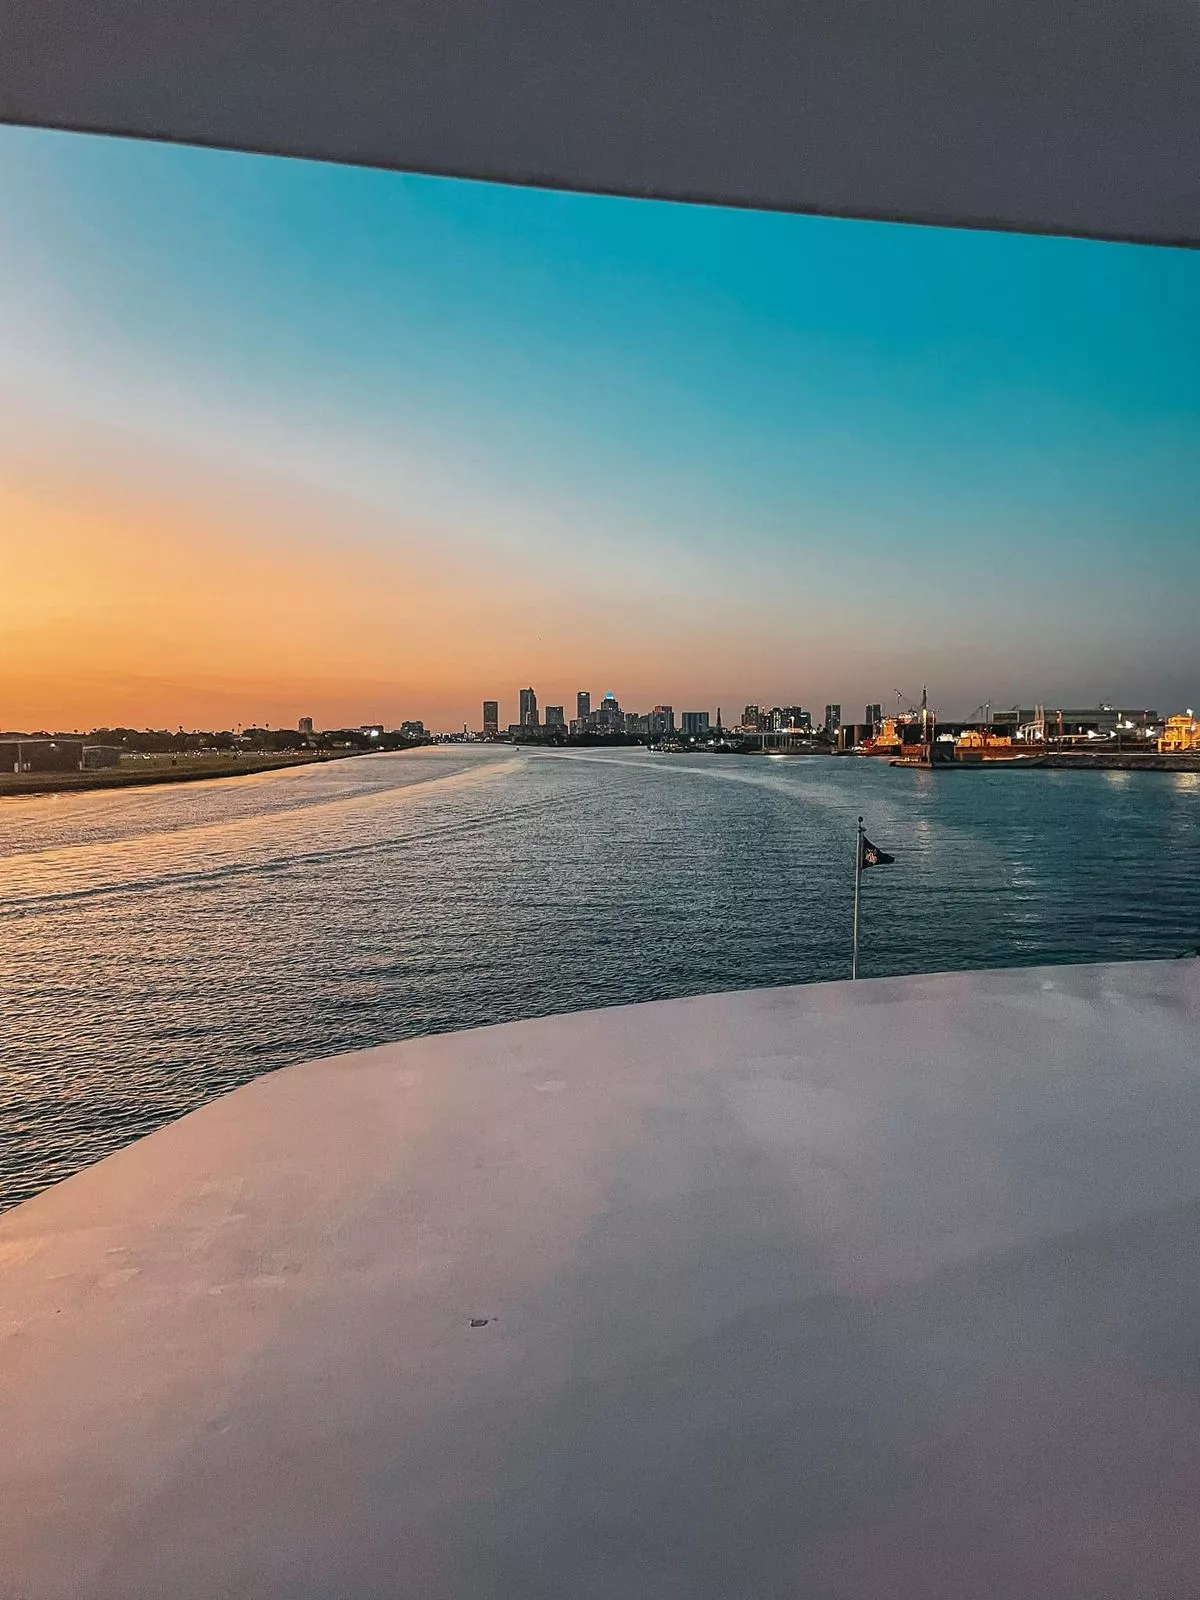 Tampa skyline at sunset from Yacht Starship